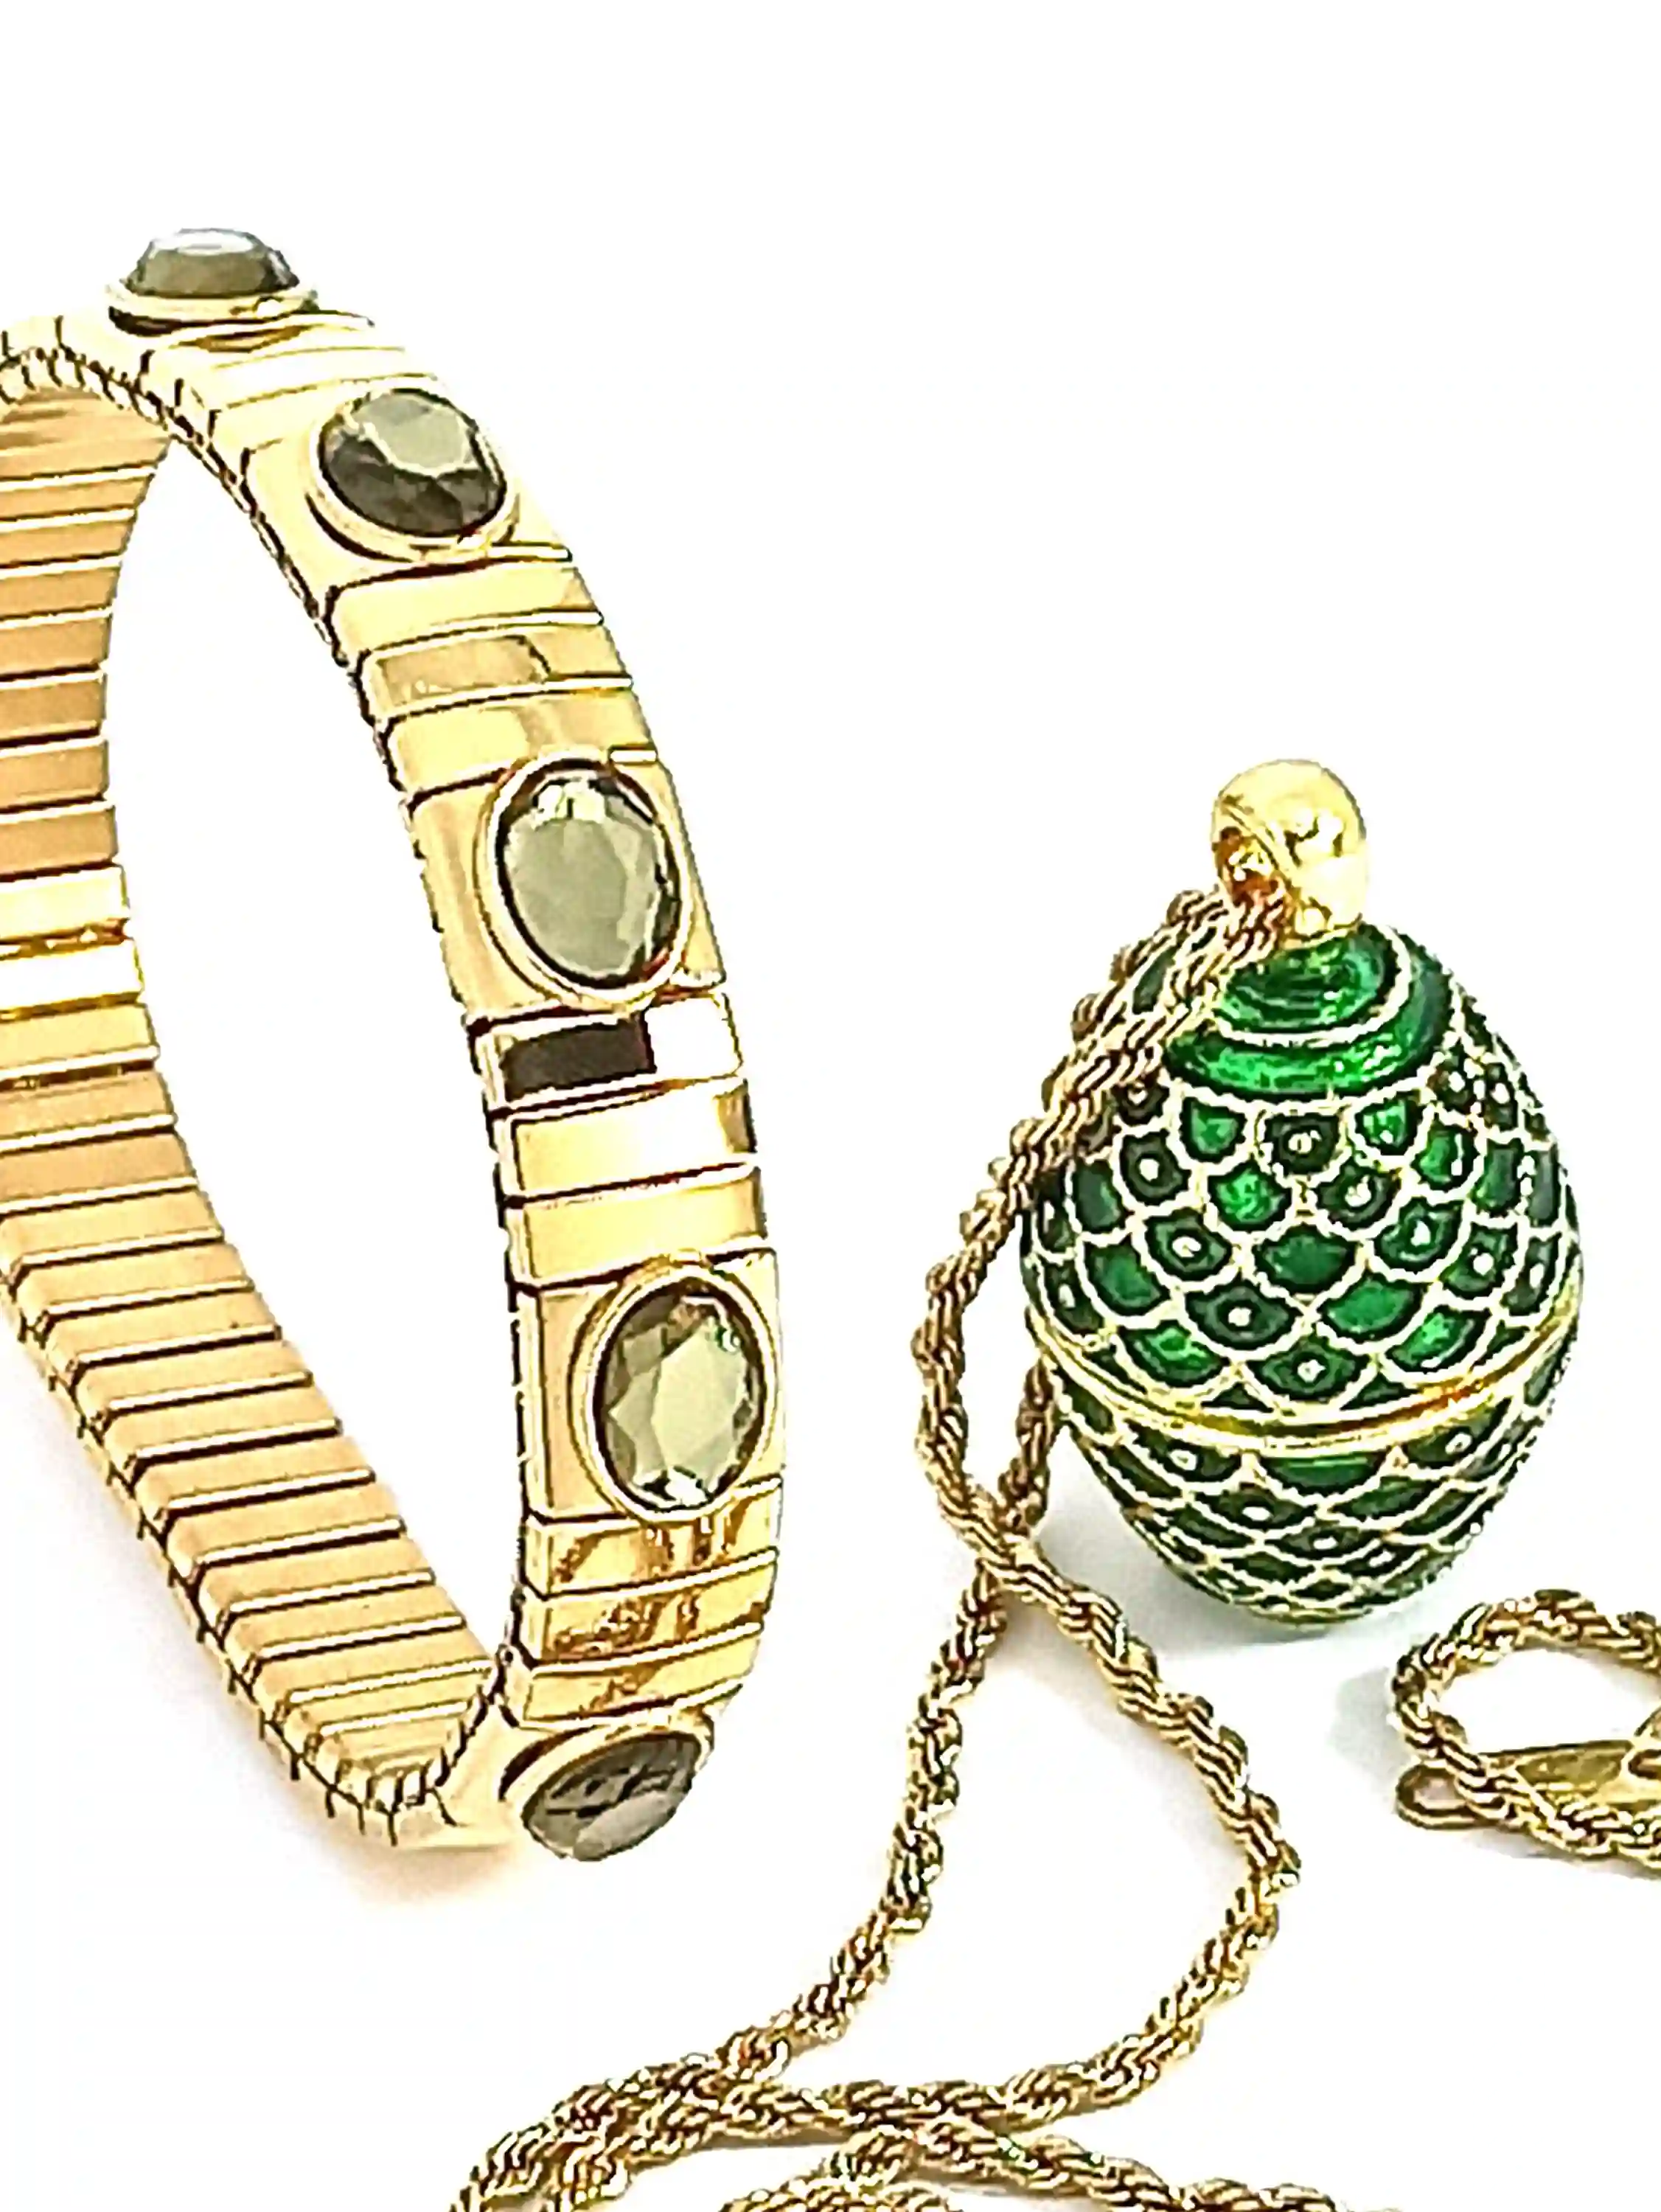 Faberge Easter Egg Unique Gift for Her Green Pendant & Bracelet SET Faberge style Egg Faberge Necklace Handmade Jewellery for Mother's Day 